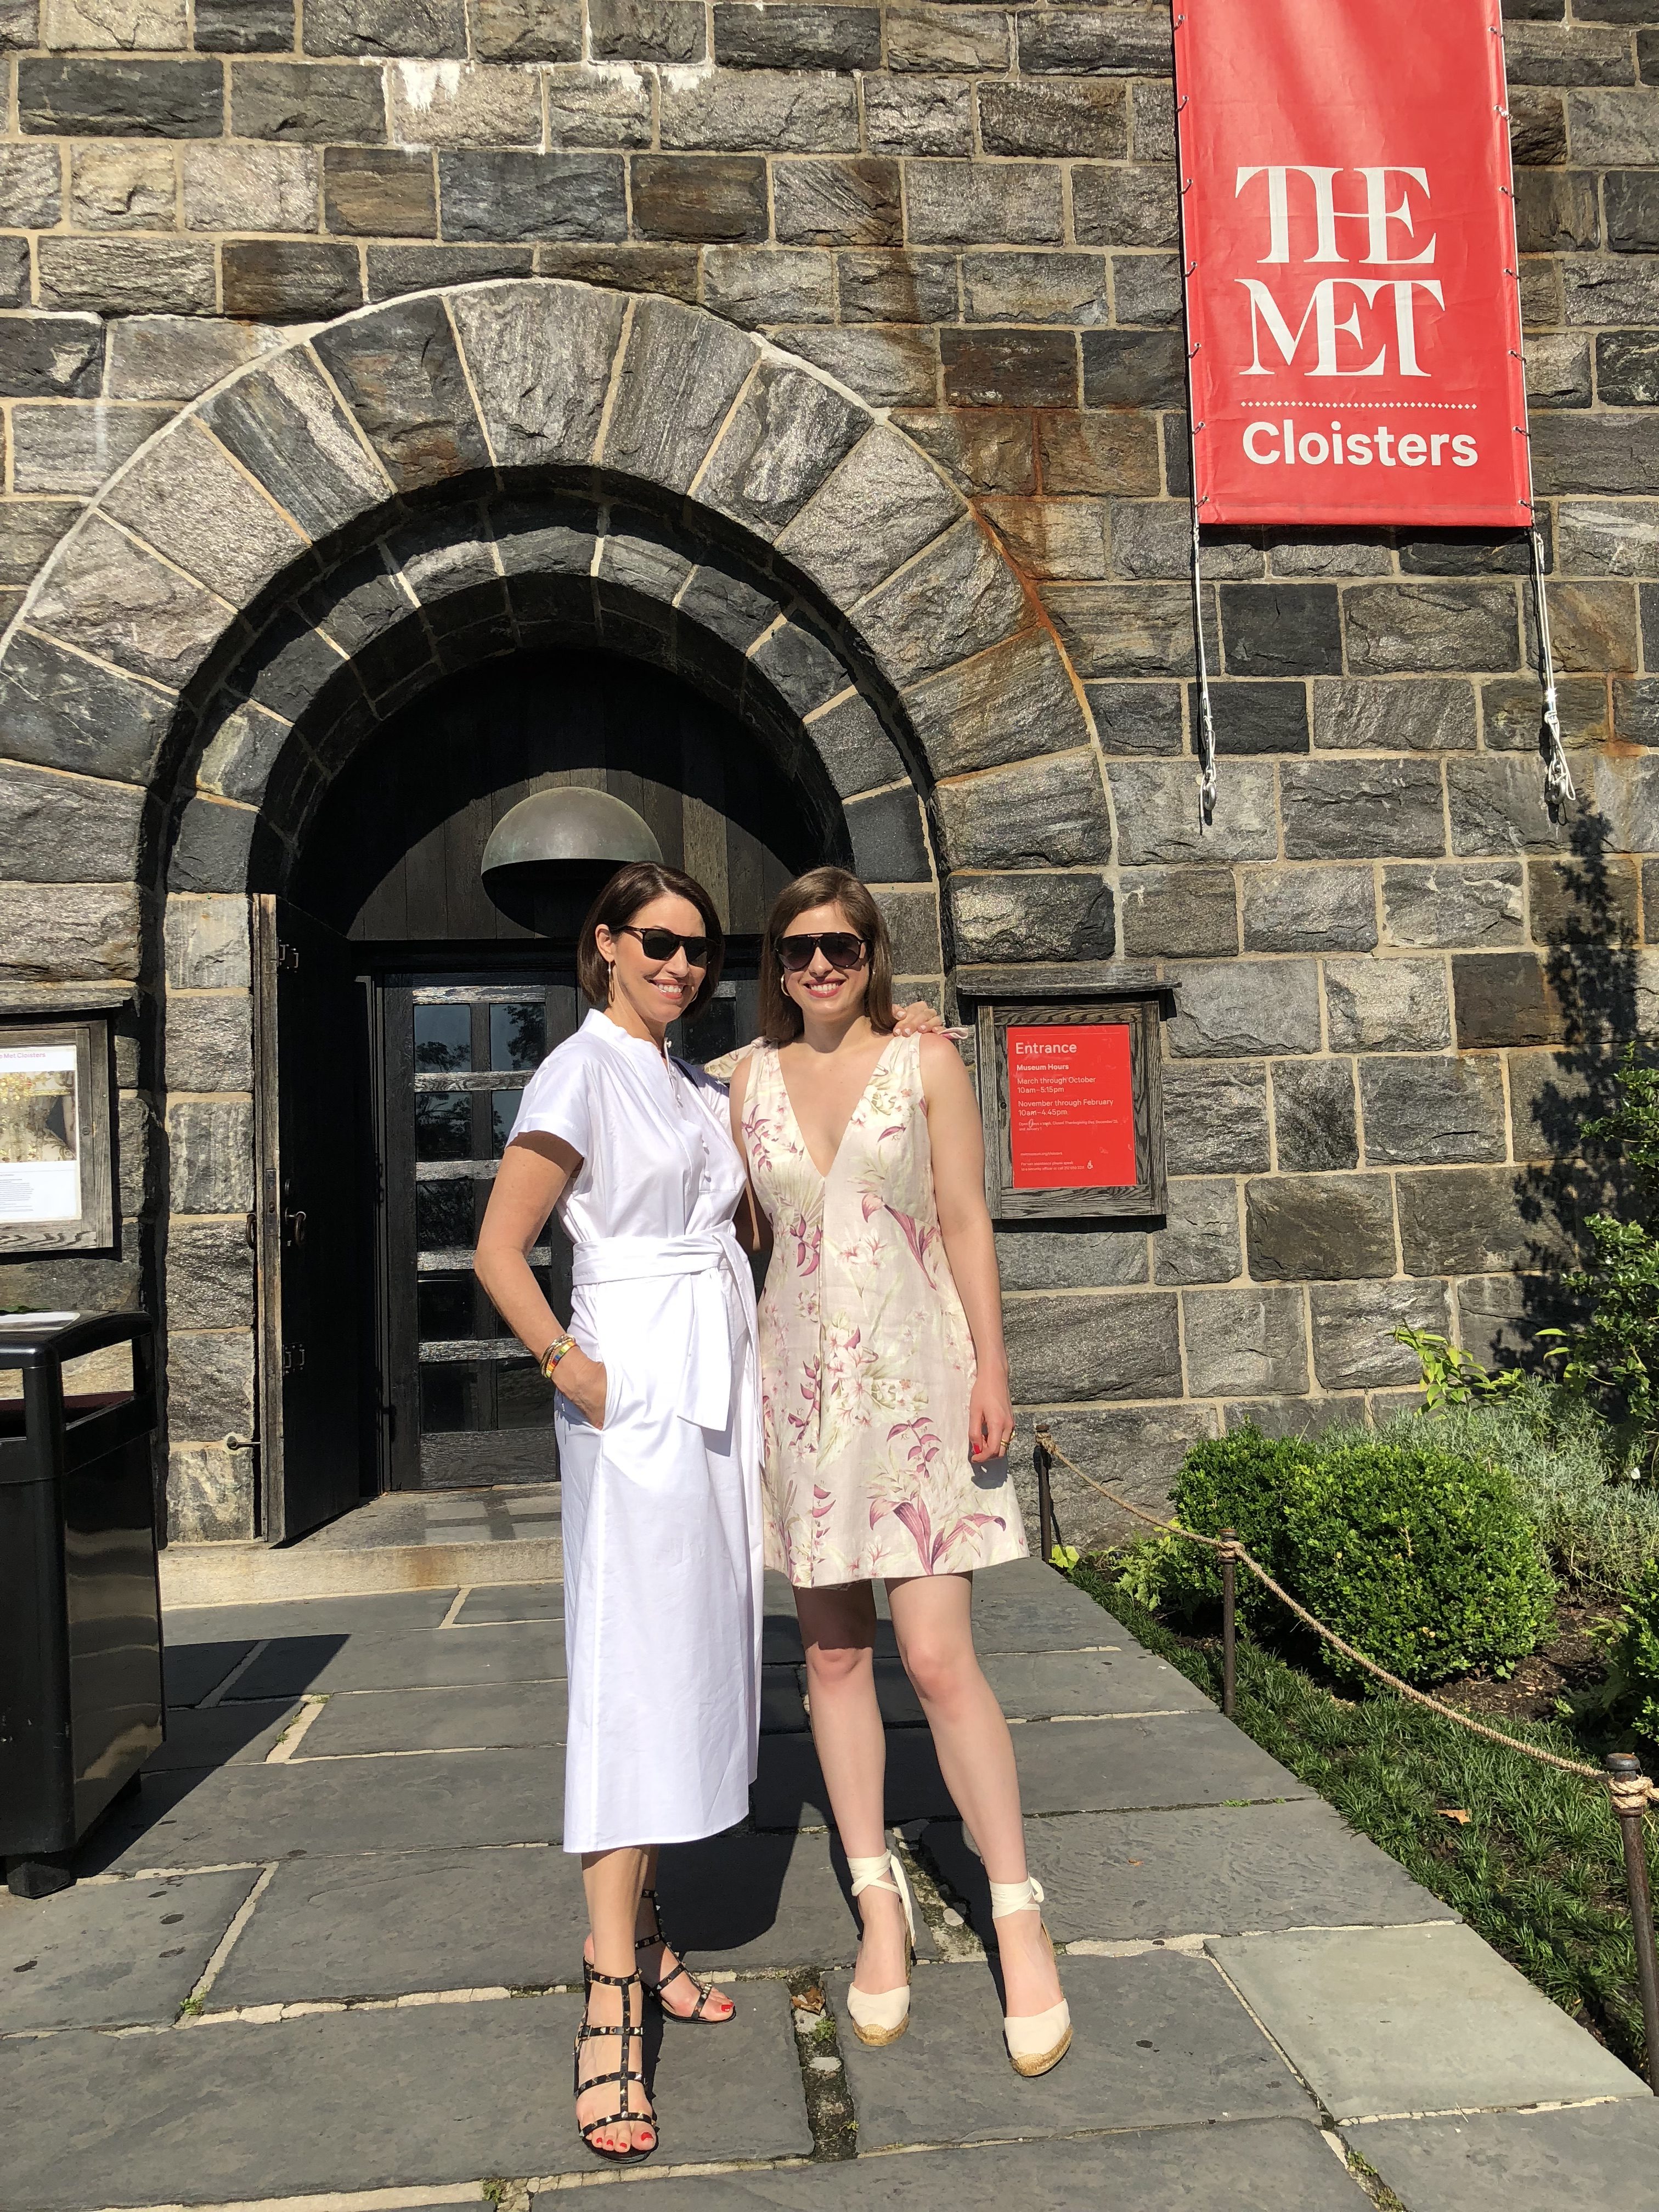 Two women standing in front of The Cloisters: a woman in a white dress and a woman in a v-neck printed dress, both in wedges and sunglasses and both have brown hair